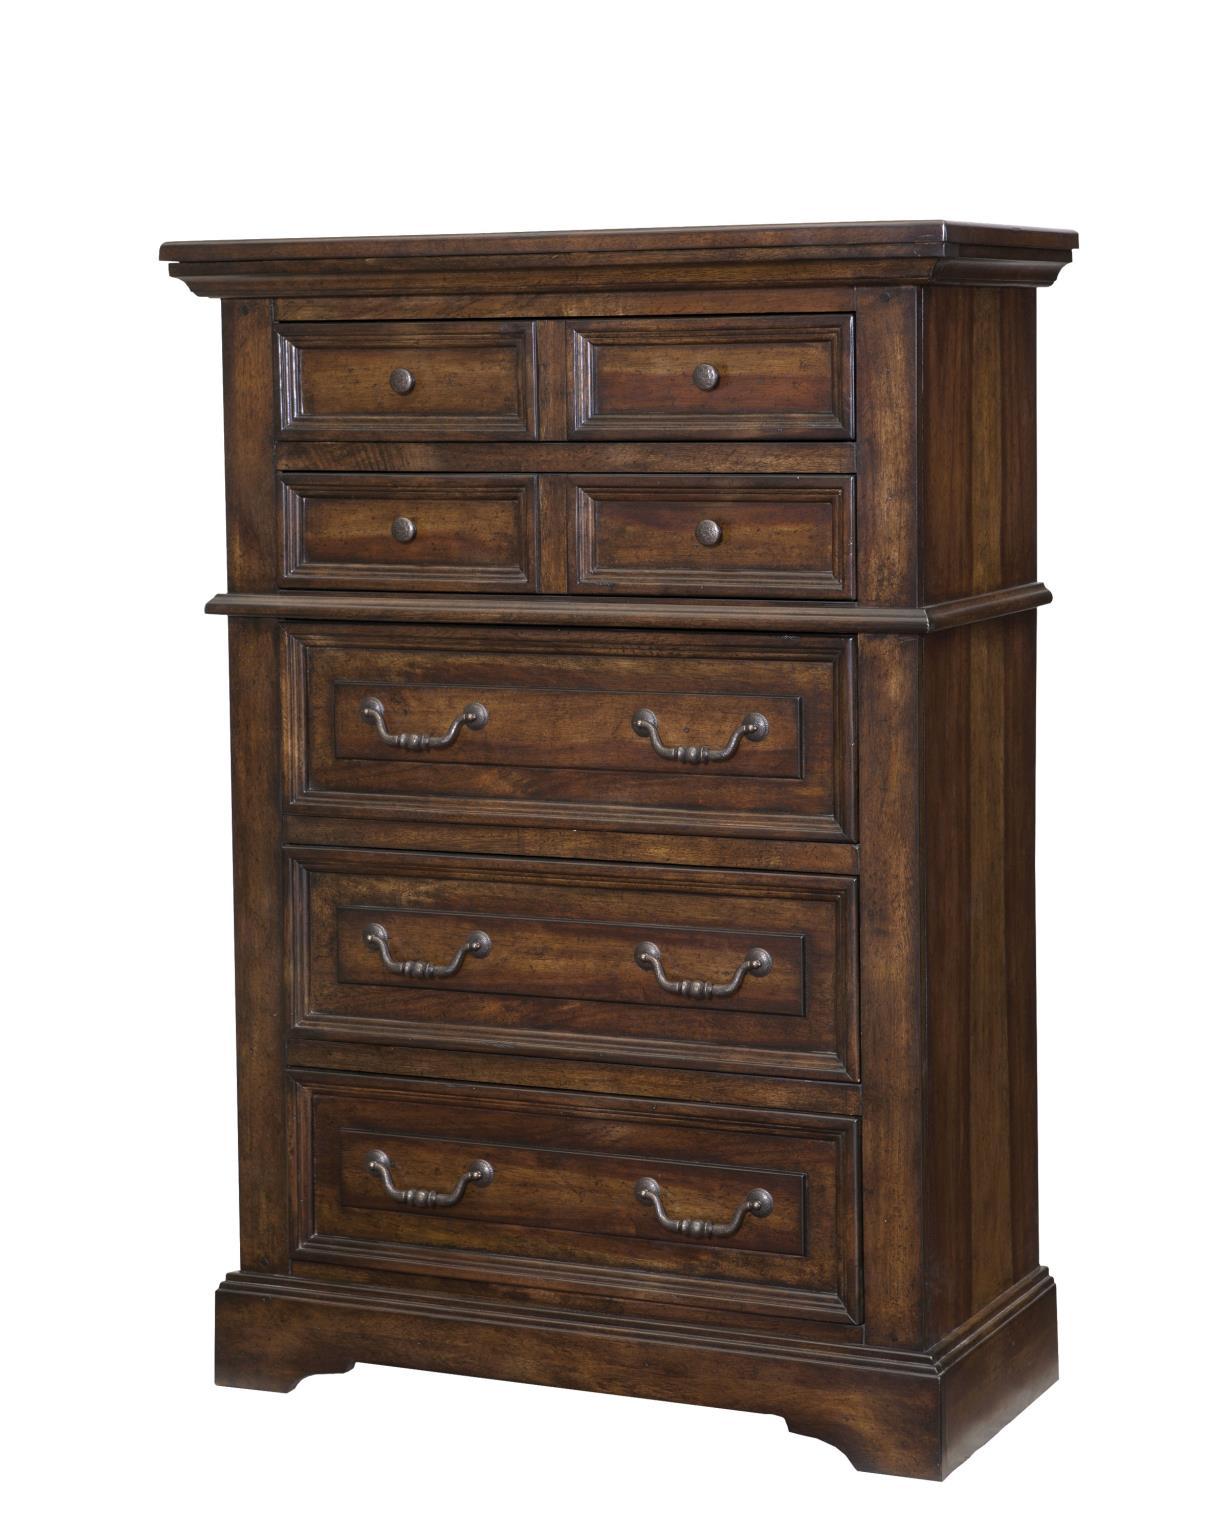 Classic, Traditional Chest 7800 STONEBROOK 7800-150 in Tobacco 